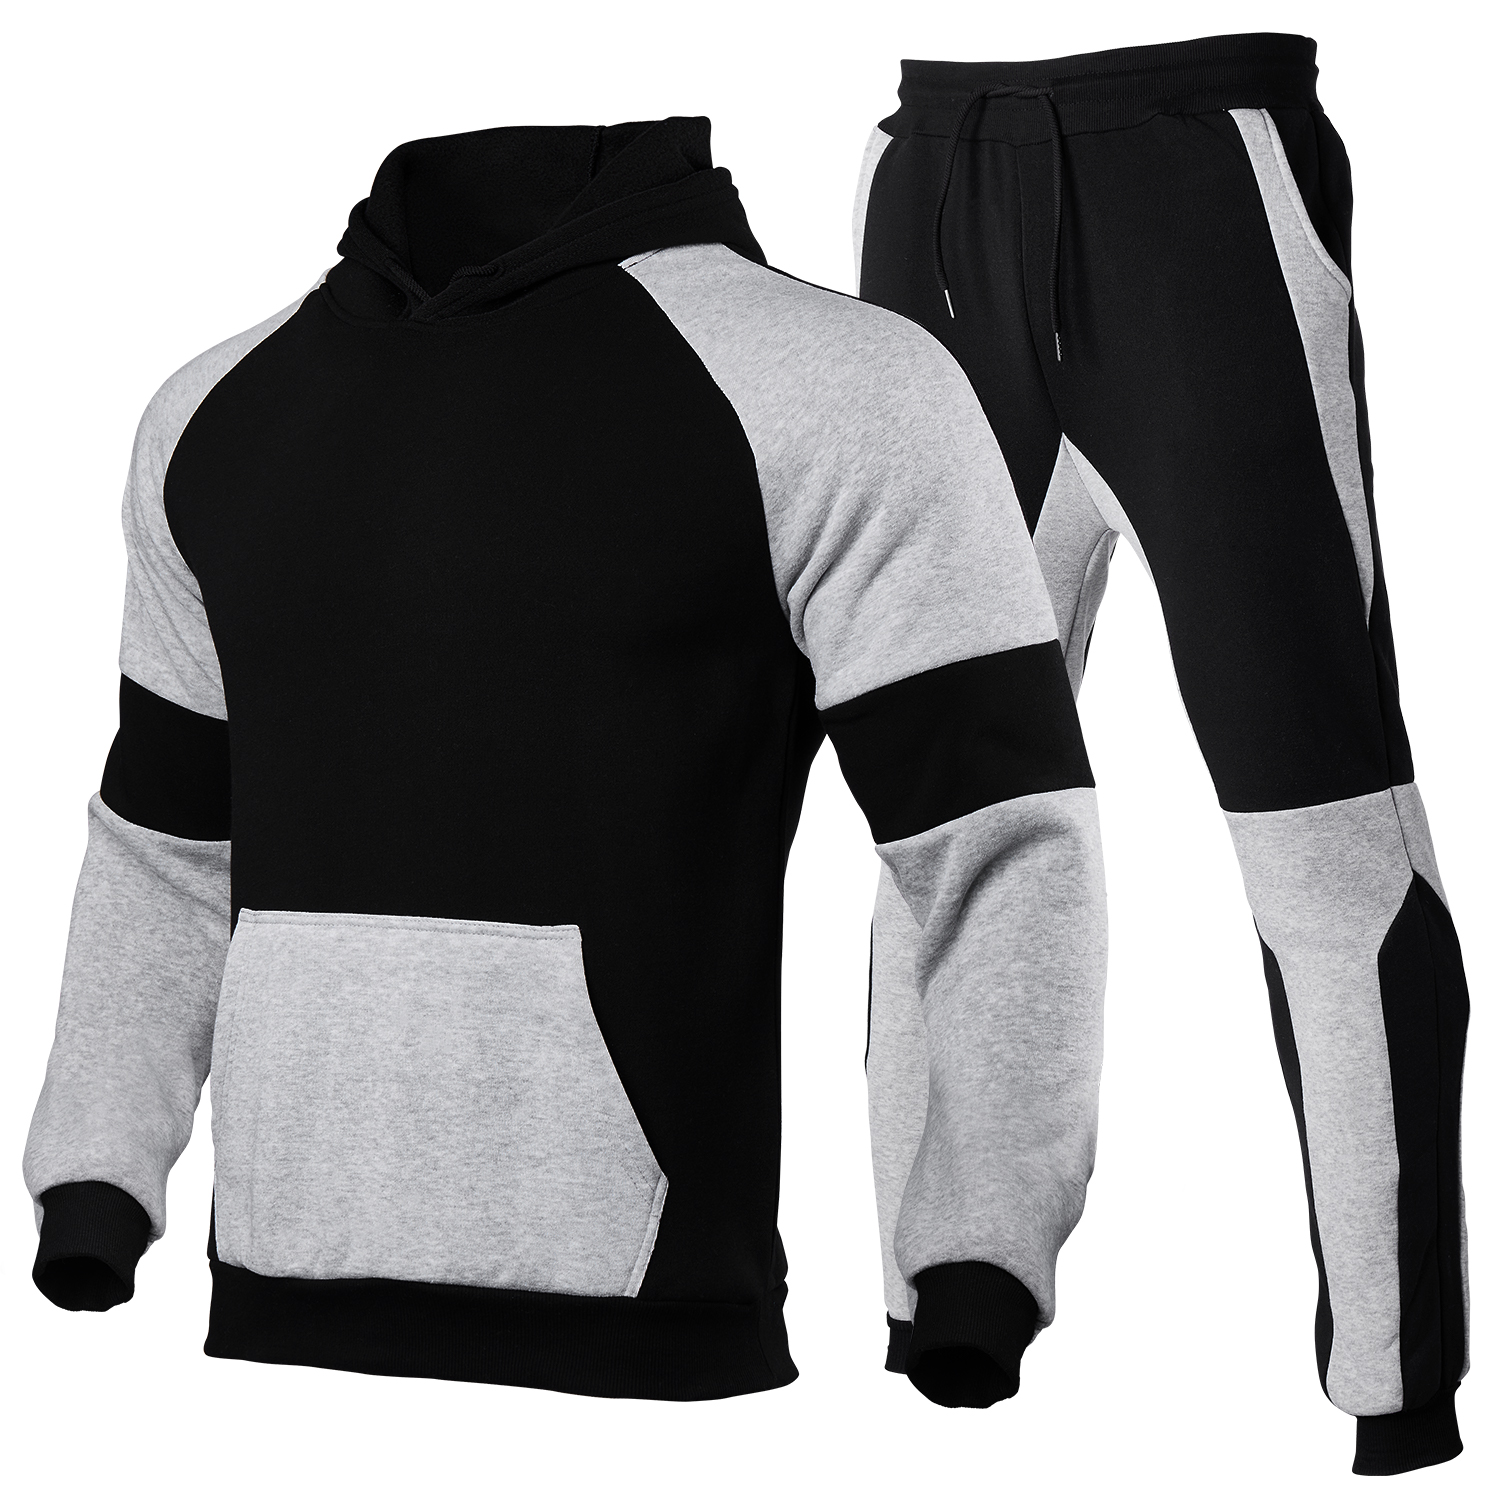 2 Pieces Sets Tracksuit Men Hooded Sweatshirt+pants Pullover Hoodie Sportwear Suit Casual Fashion Outwear Clothes Streetswear